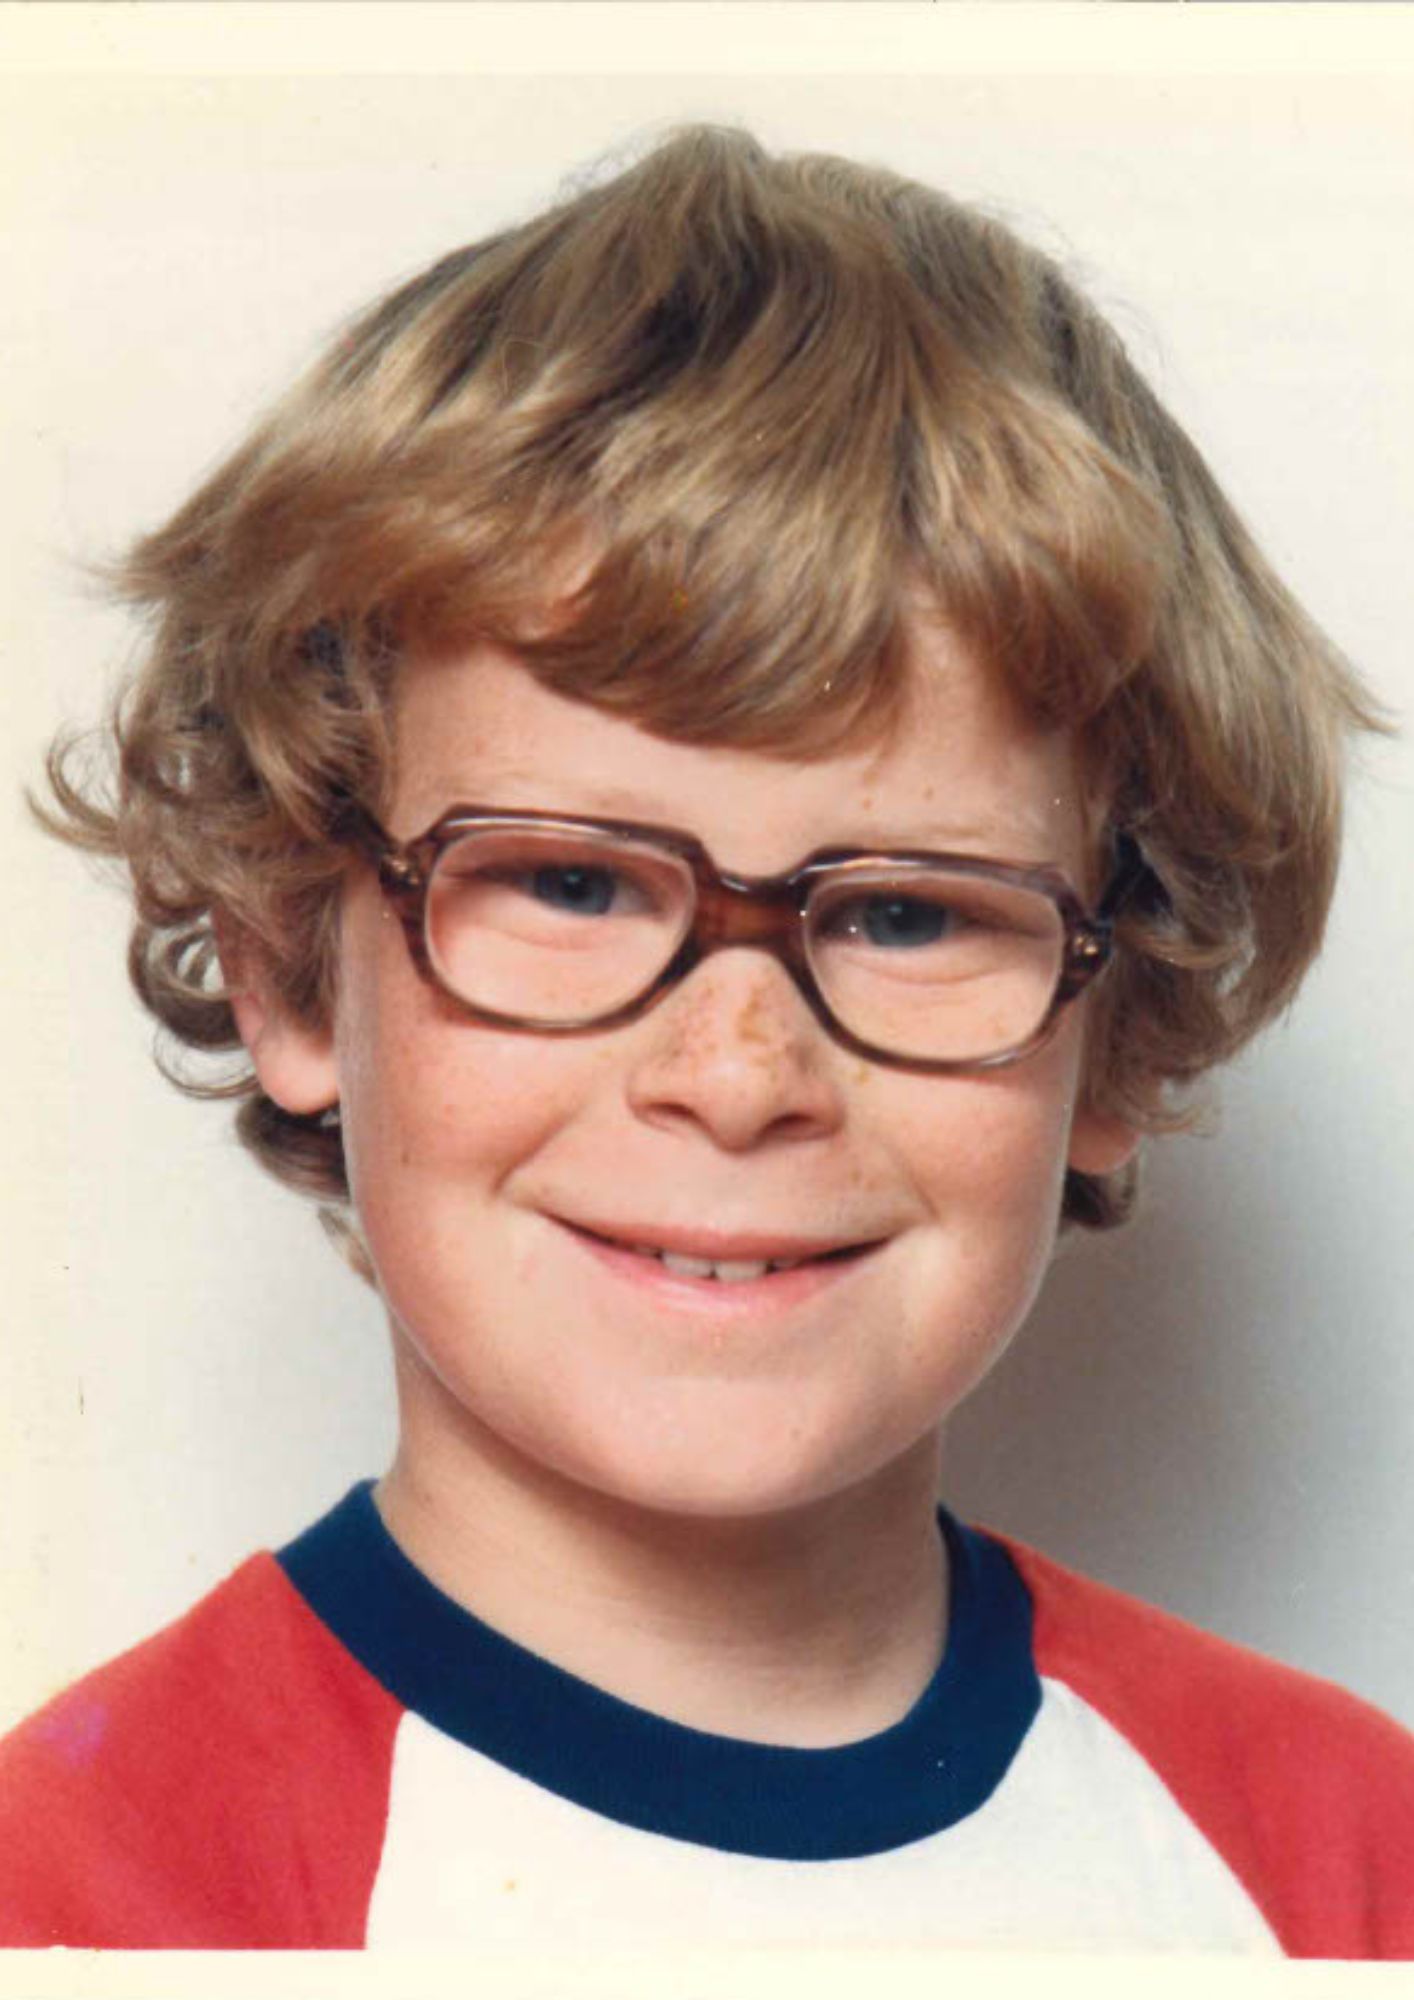 boy with dark blond hair and tortisehell glasses